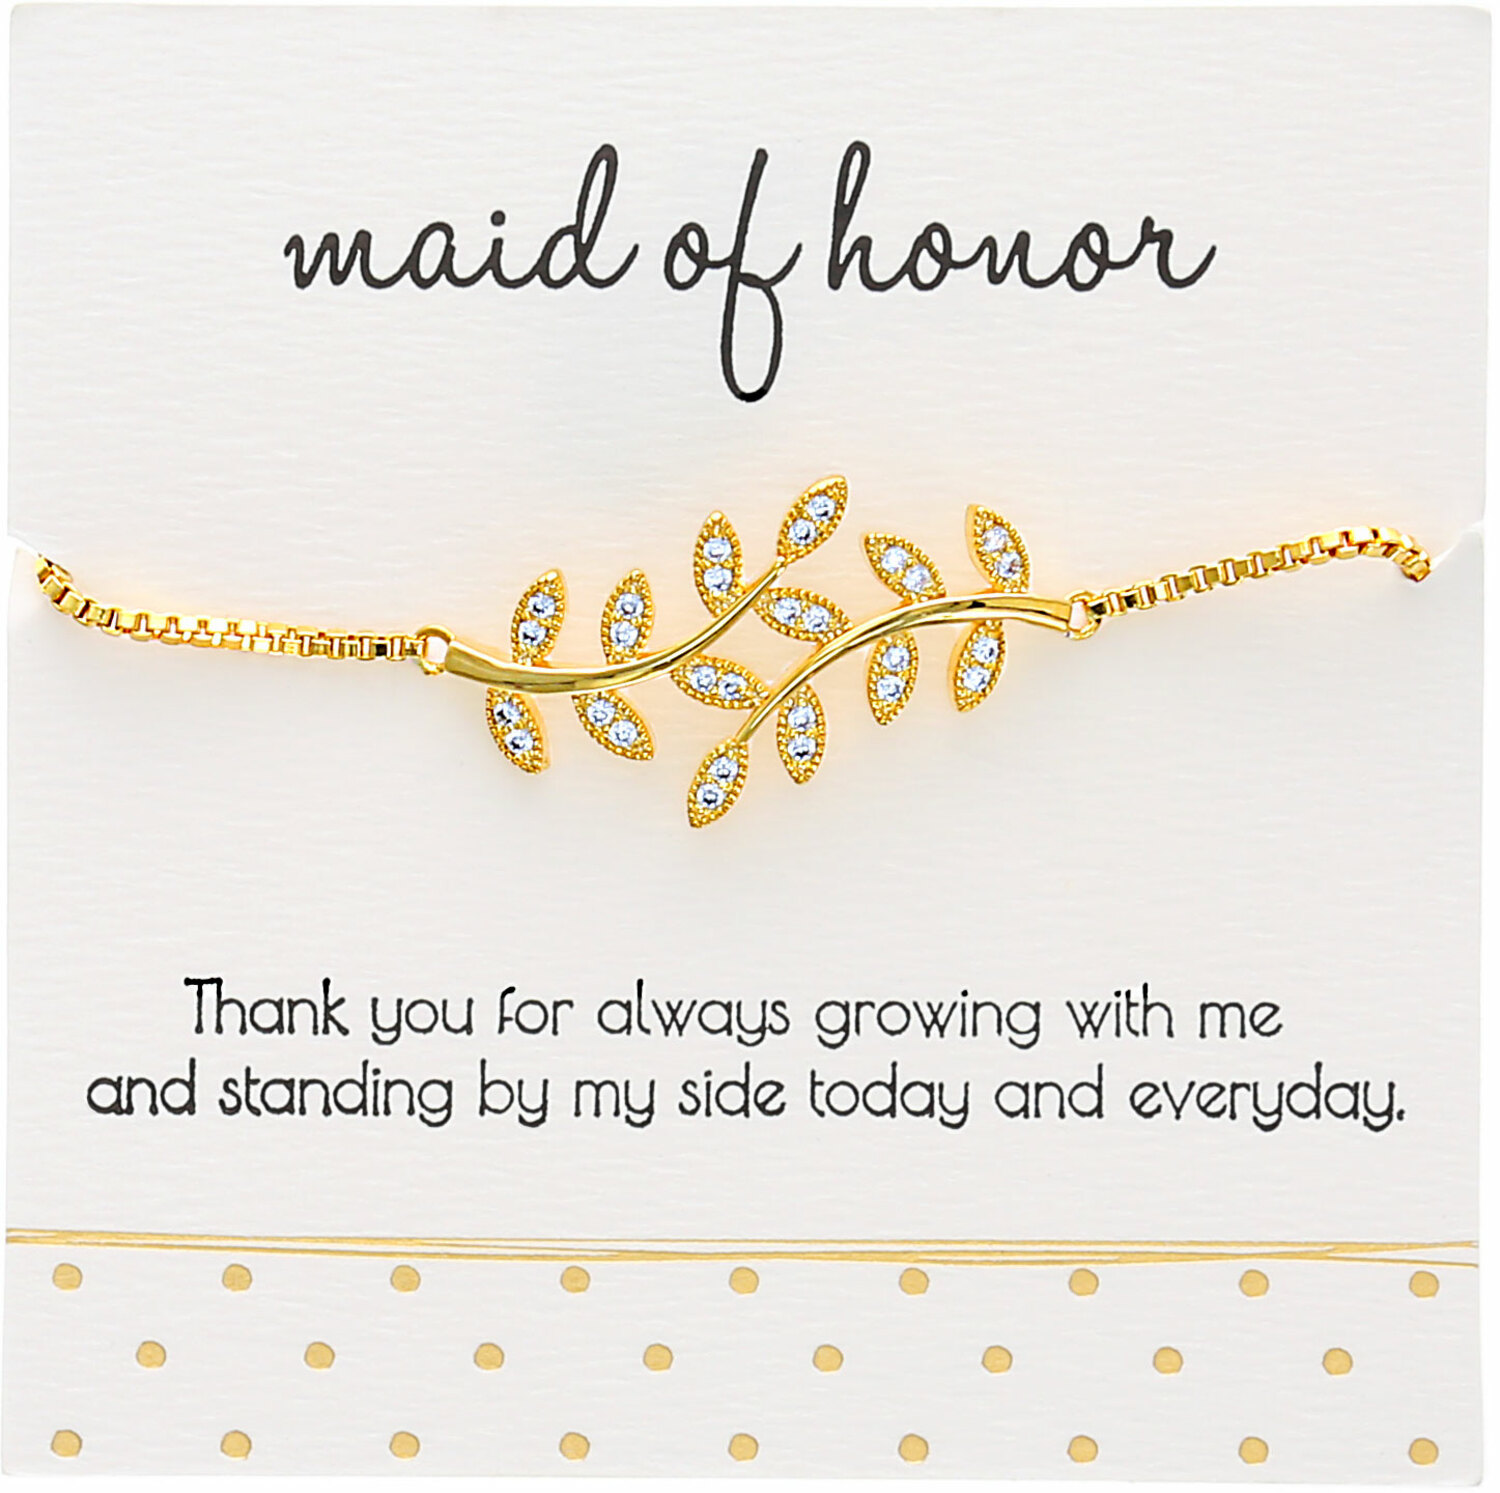 Maid of Honor - White Zircon Leaf by Love Grows - Maid of Honor - White Zircon Leaf - Gold Plated Adjustable Bracelet